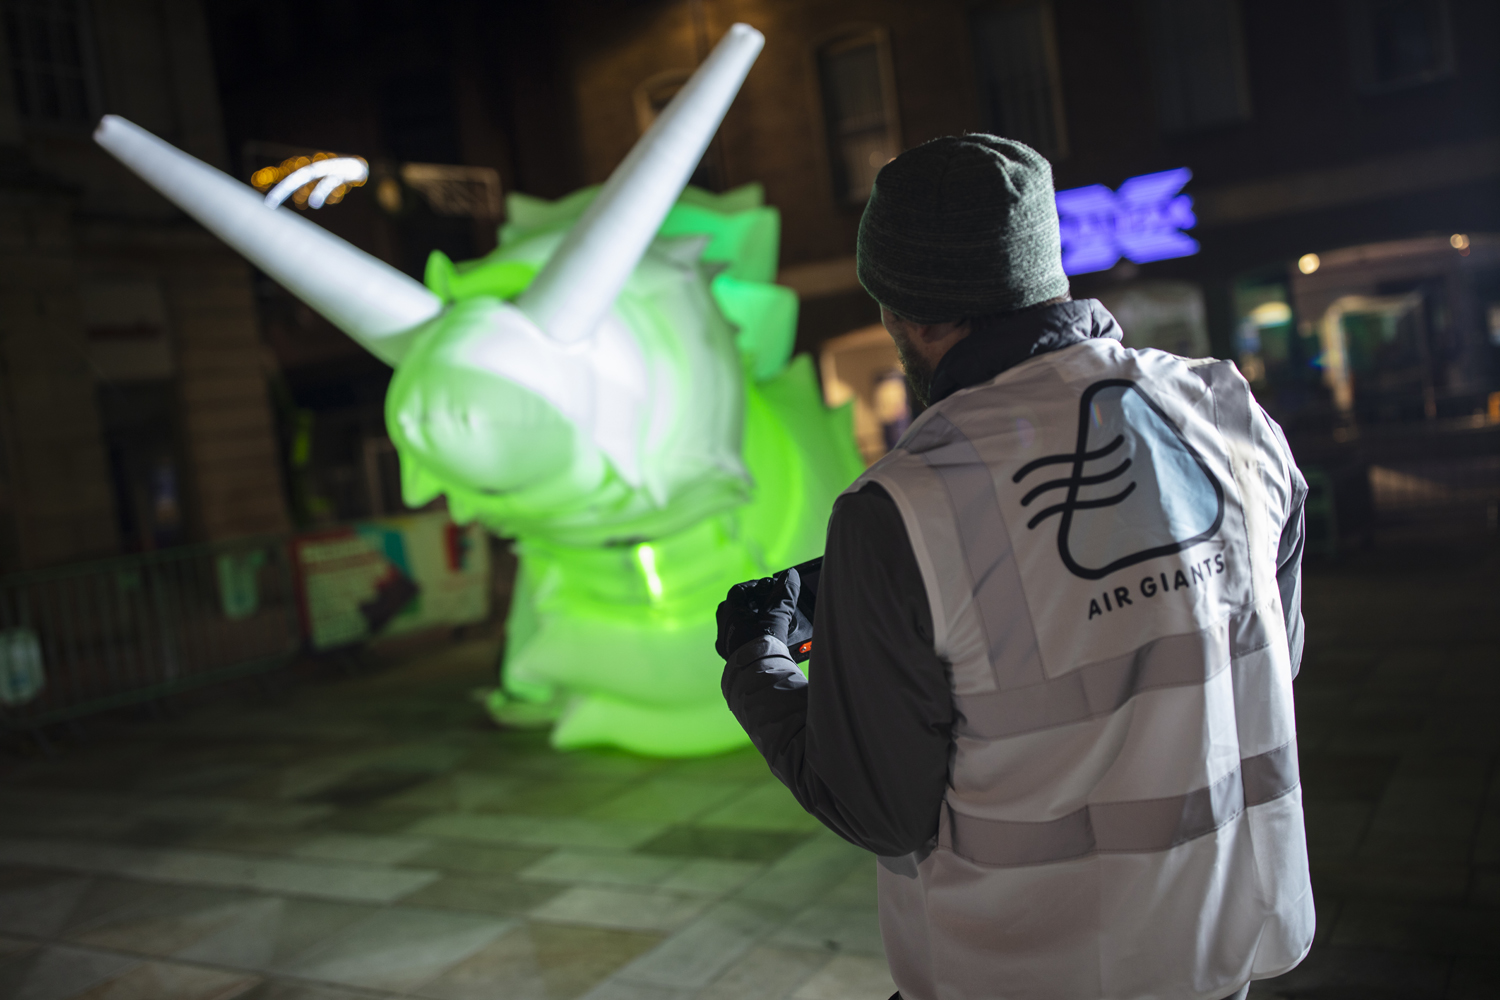 Foreground: Man standing with his back to the camera holding a control pad. Background: A giant inflatable robot snail lit up with a green light.